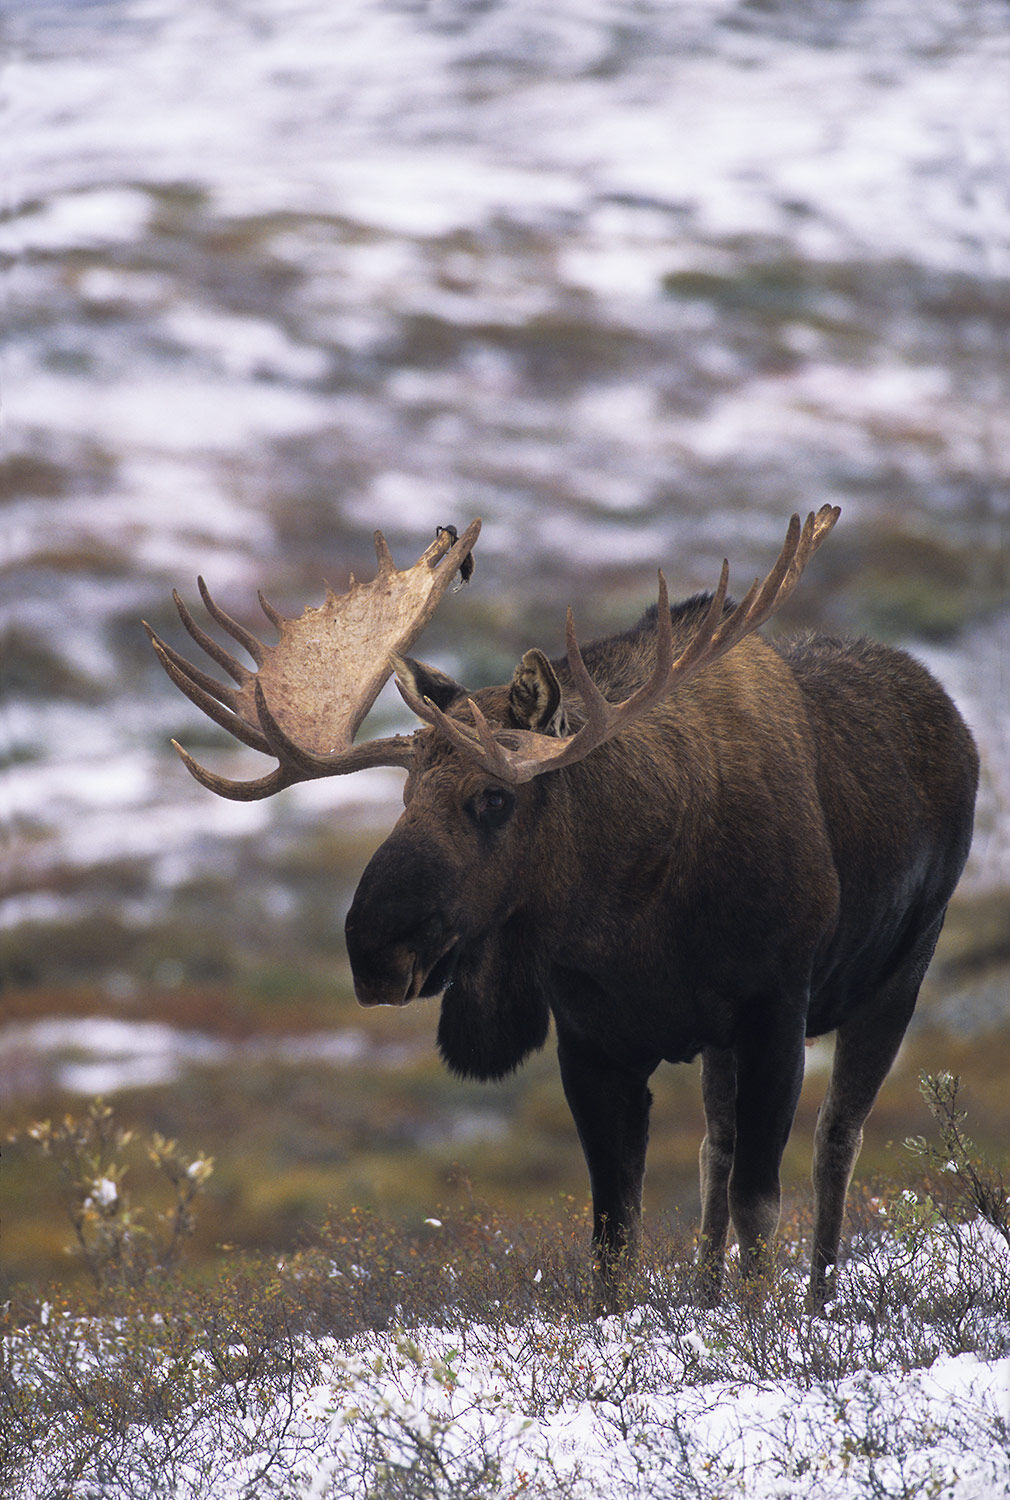 What’s not to love? Fresh snow, fall color and a bull moose!!! The majesty of the Alaskan wilderness is on full display in...